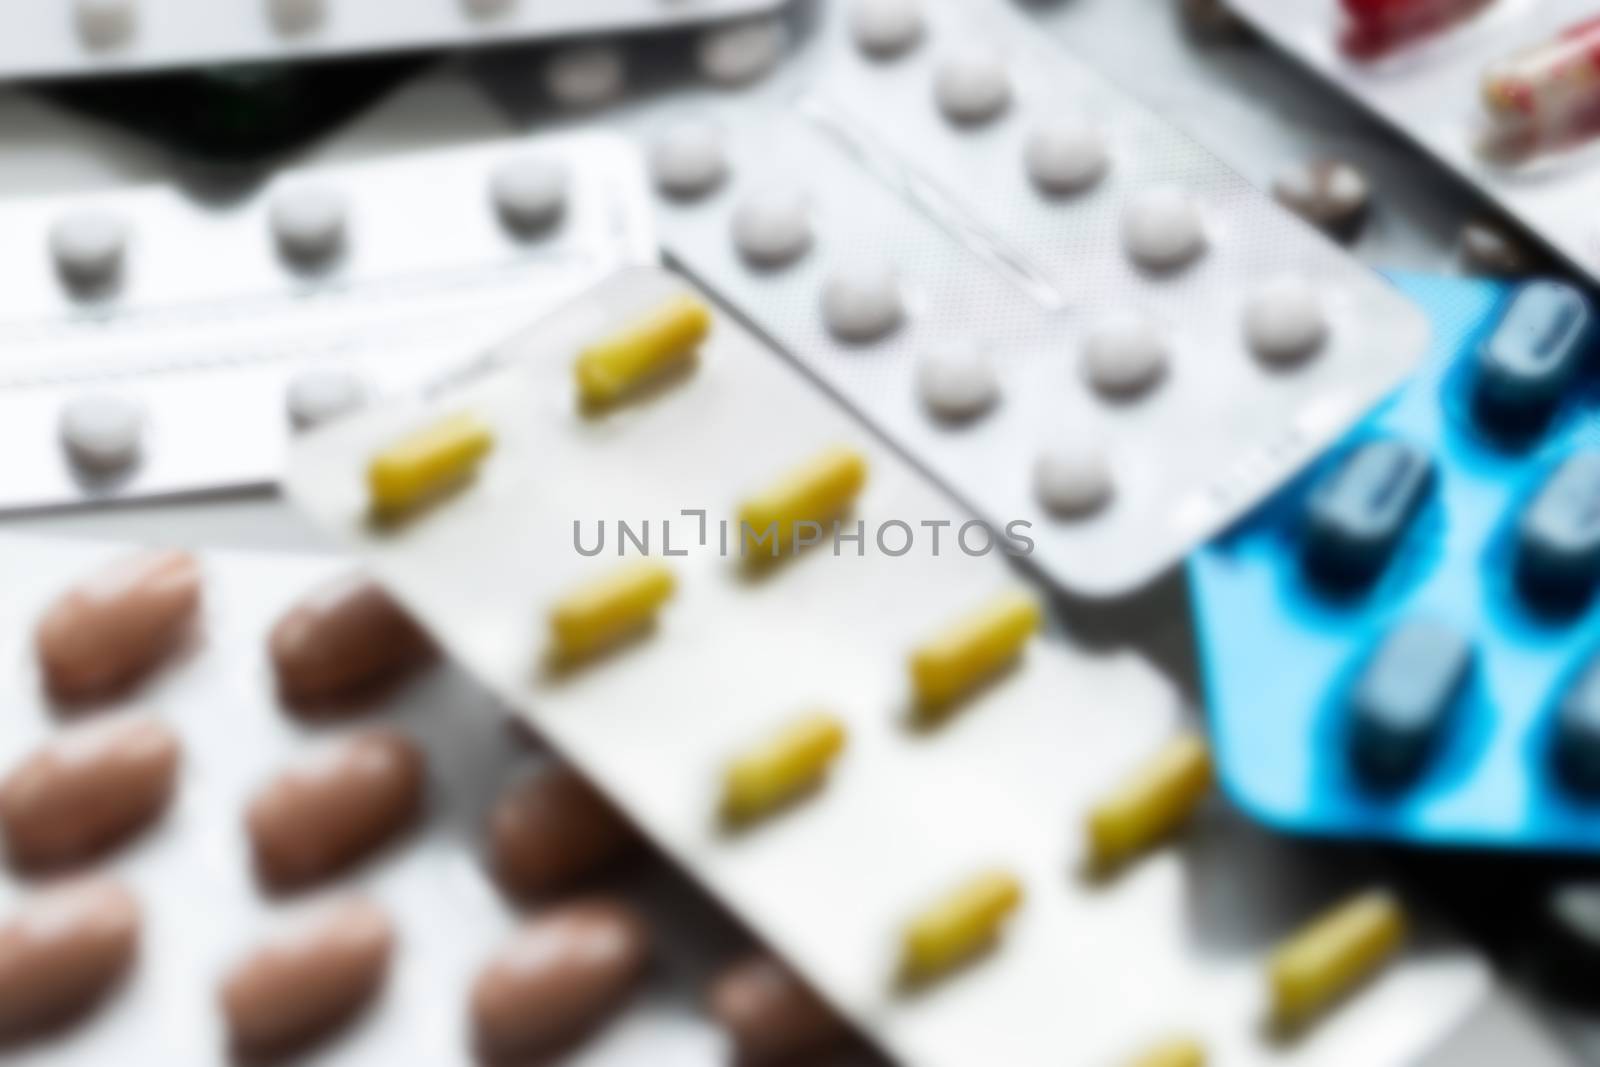 Vitamins and tablets in blister packs, close-up. Blurred background, place to insert text. Modern healthcare and pharmacy.